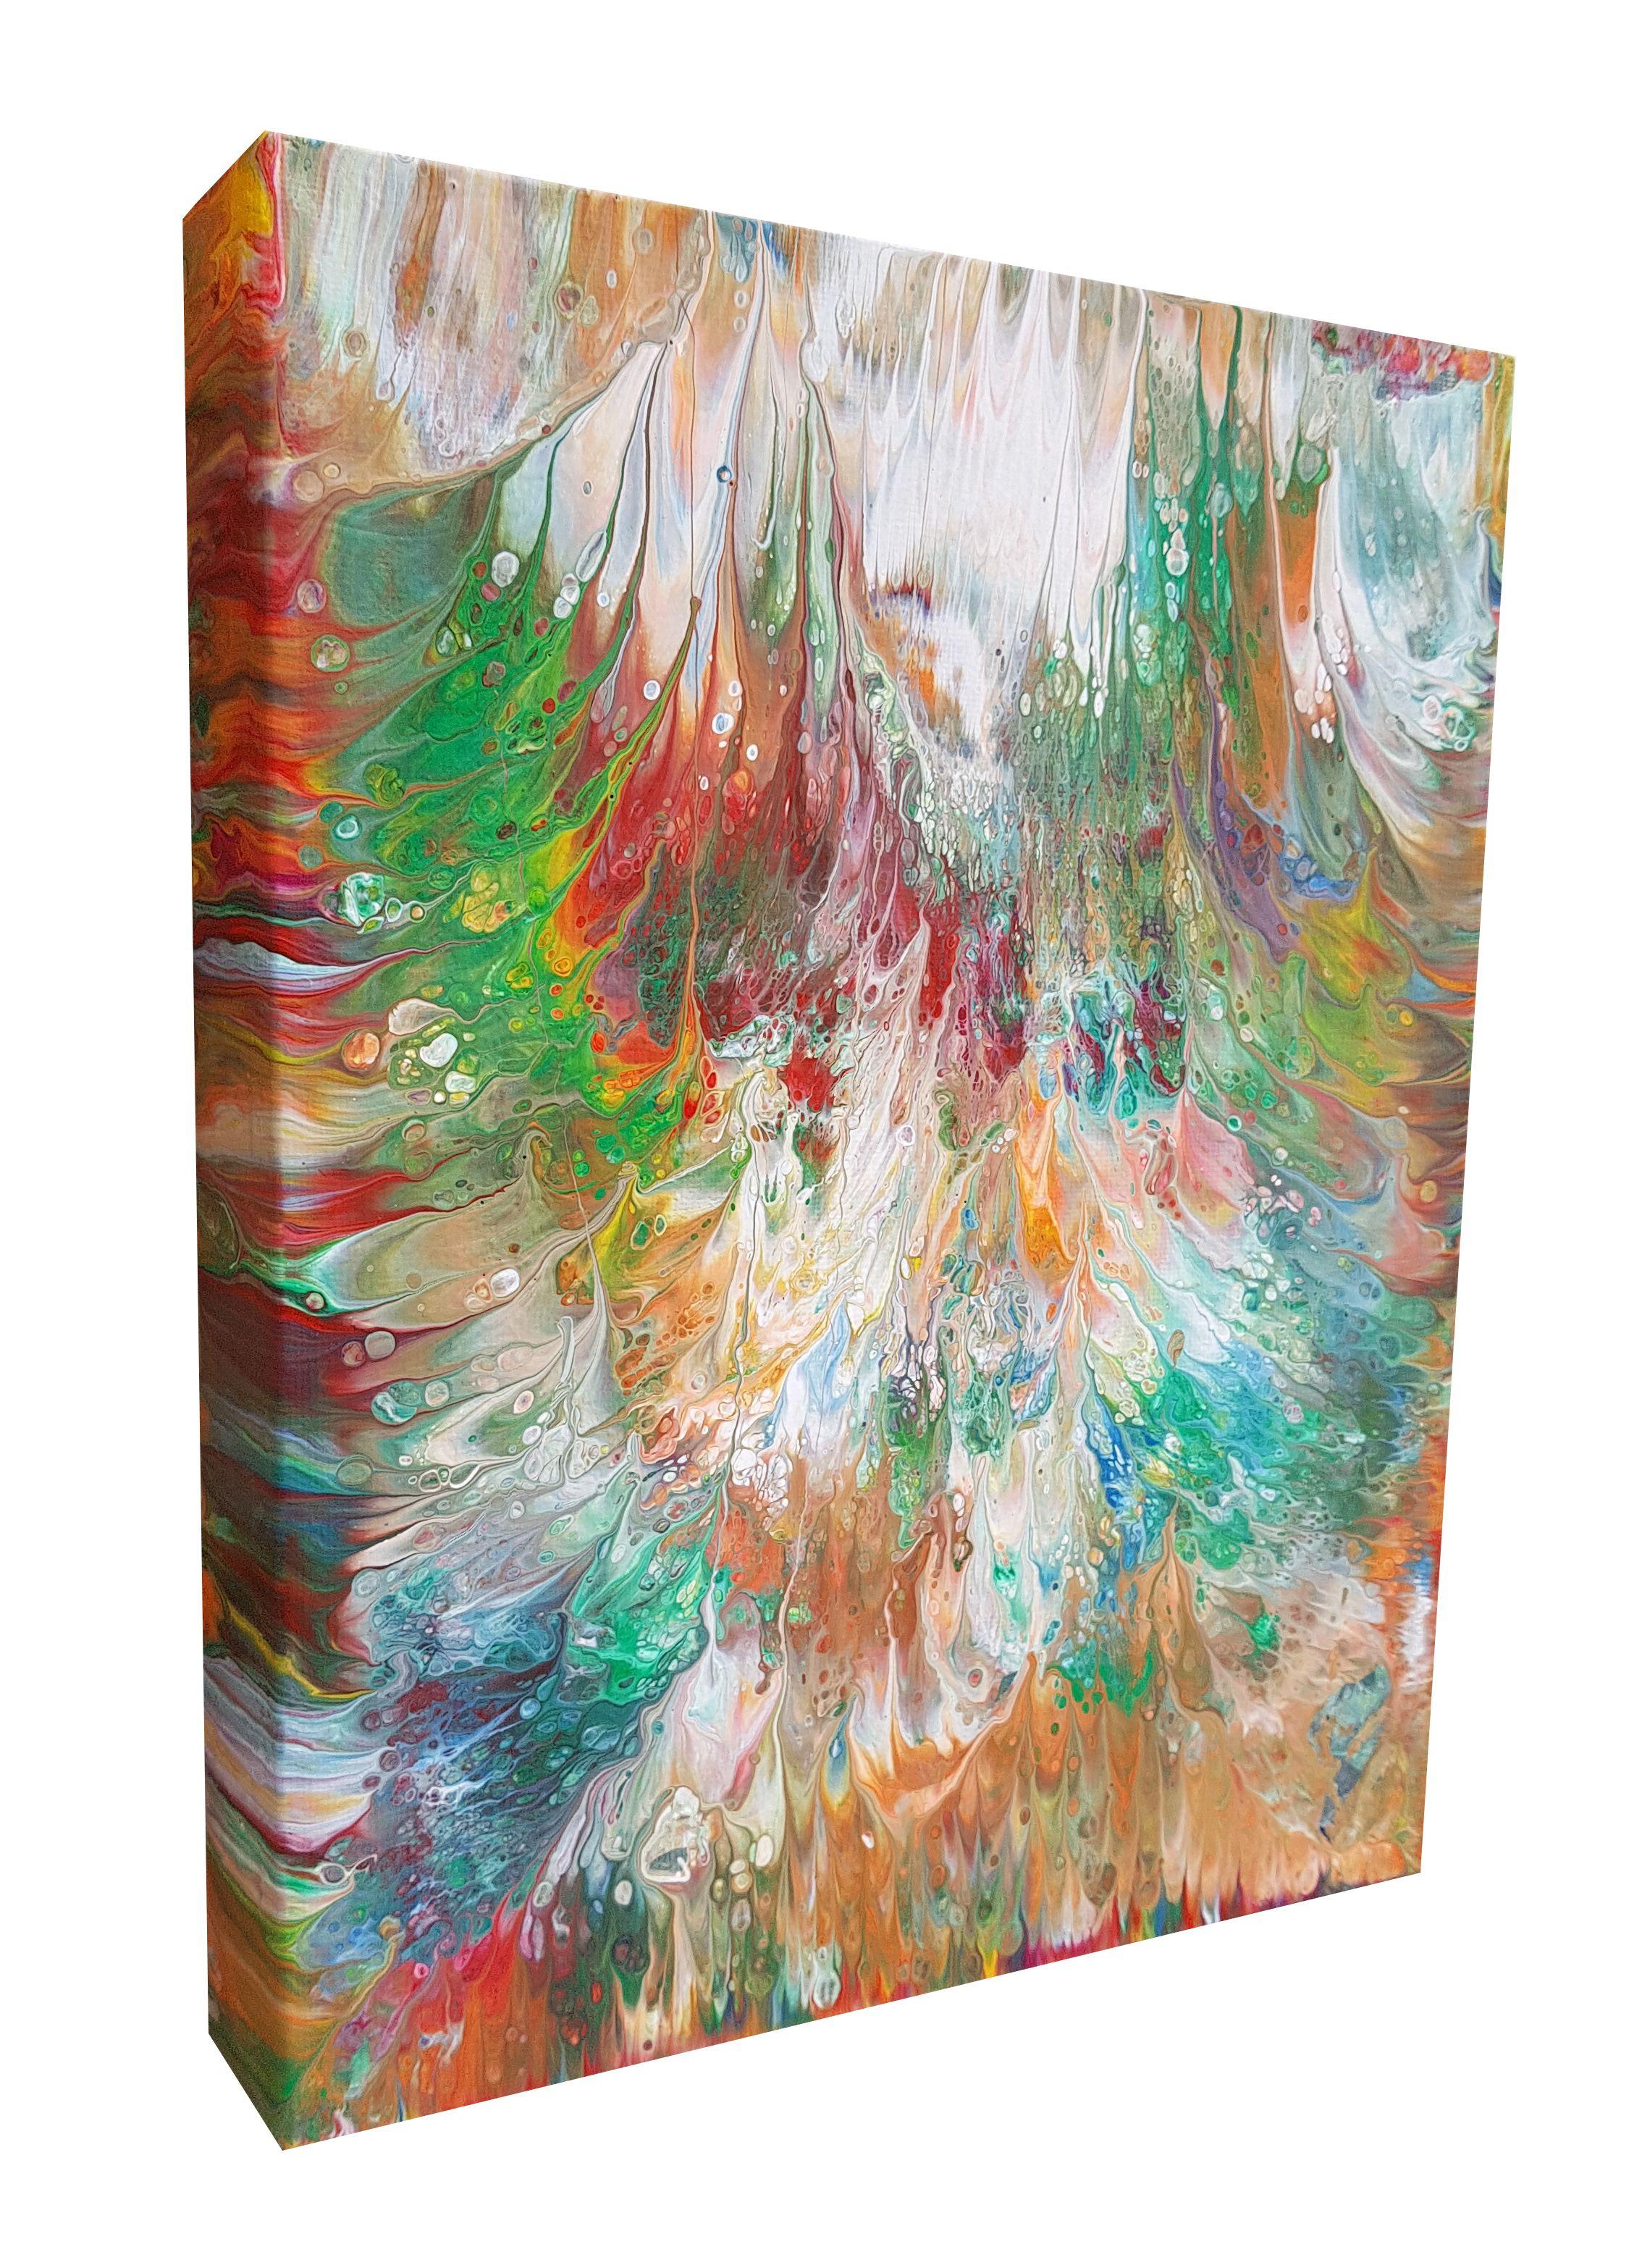 This is a beautiful abstract painting with ethereal white clouds and light blue hues flowing together serenely with vibrant accent colours of red, green, custom light orange and salmon pink. A calming essence and fierce energy combine to create a